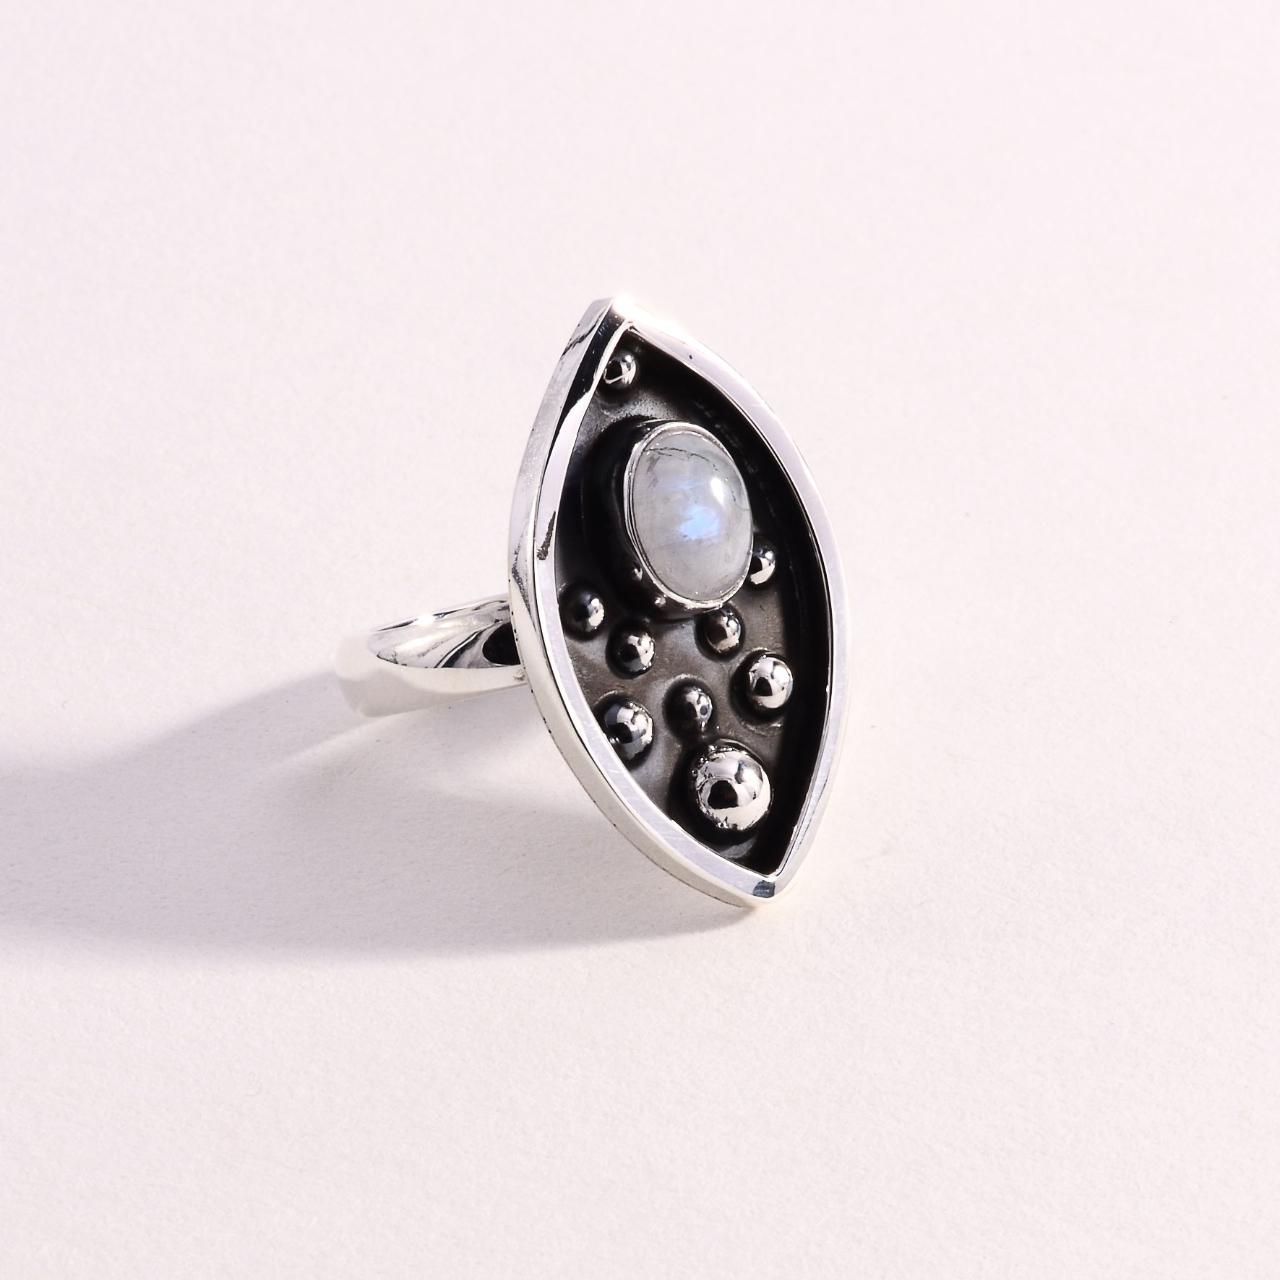 Product Image 2 - Sterling 925 Moonstone Ring

Sterling Silver

Size